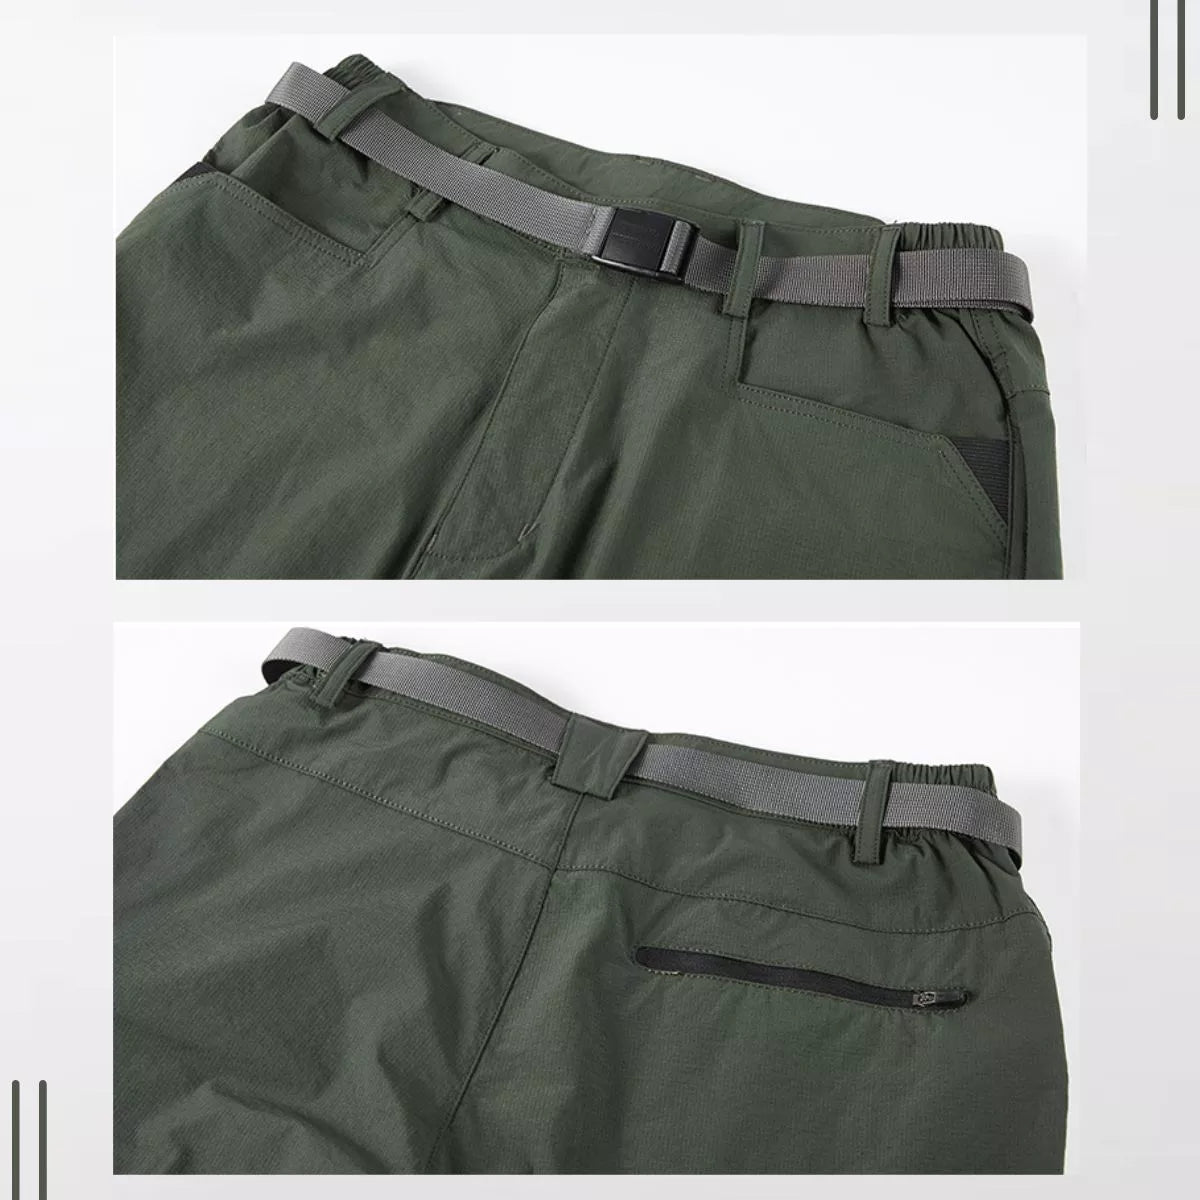 Details Of The S/23 Summer Techwear Shorts. Army Green Color